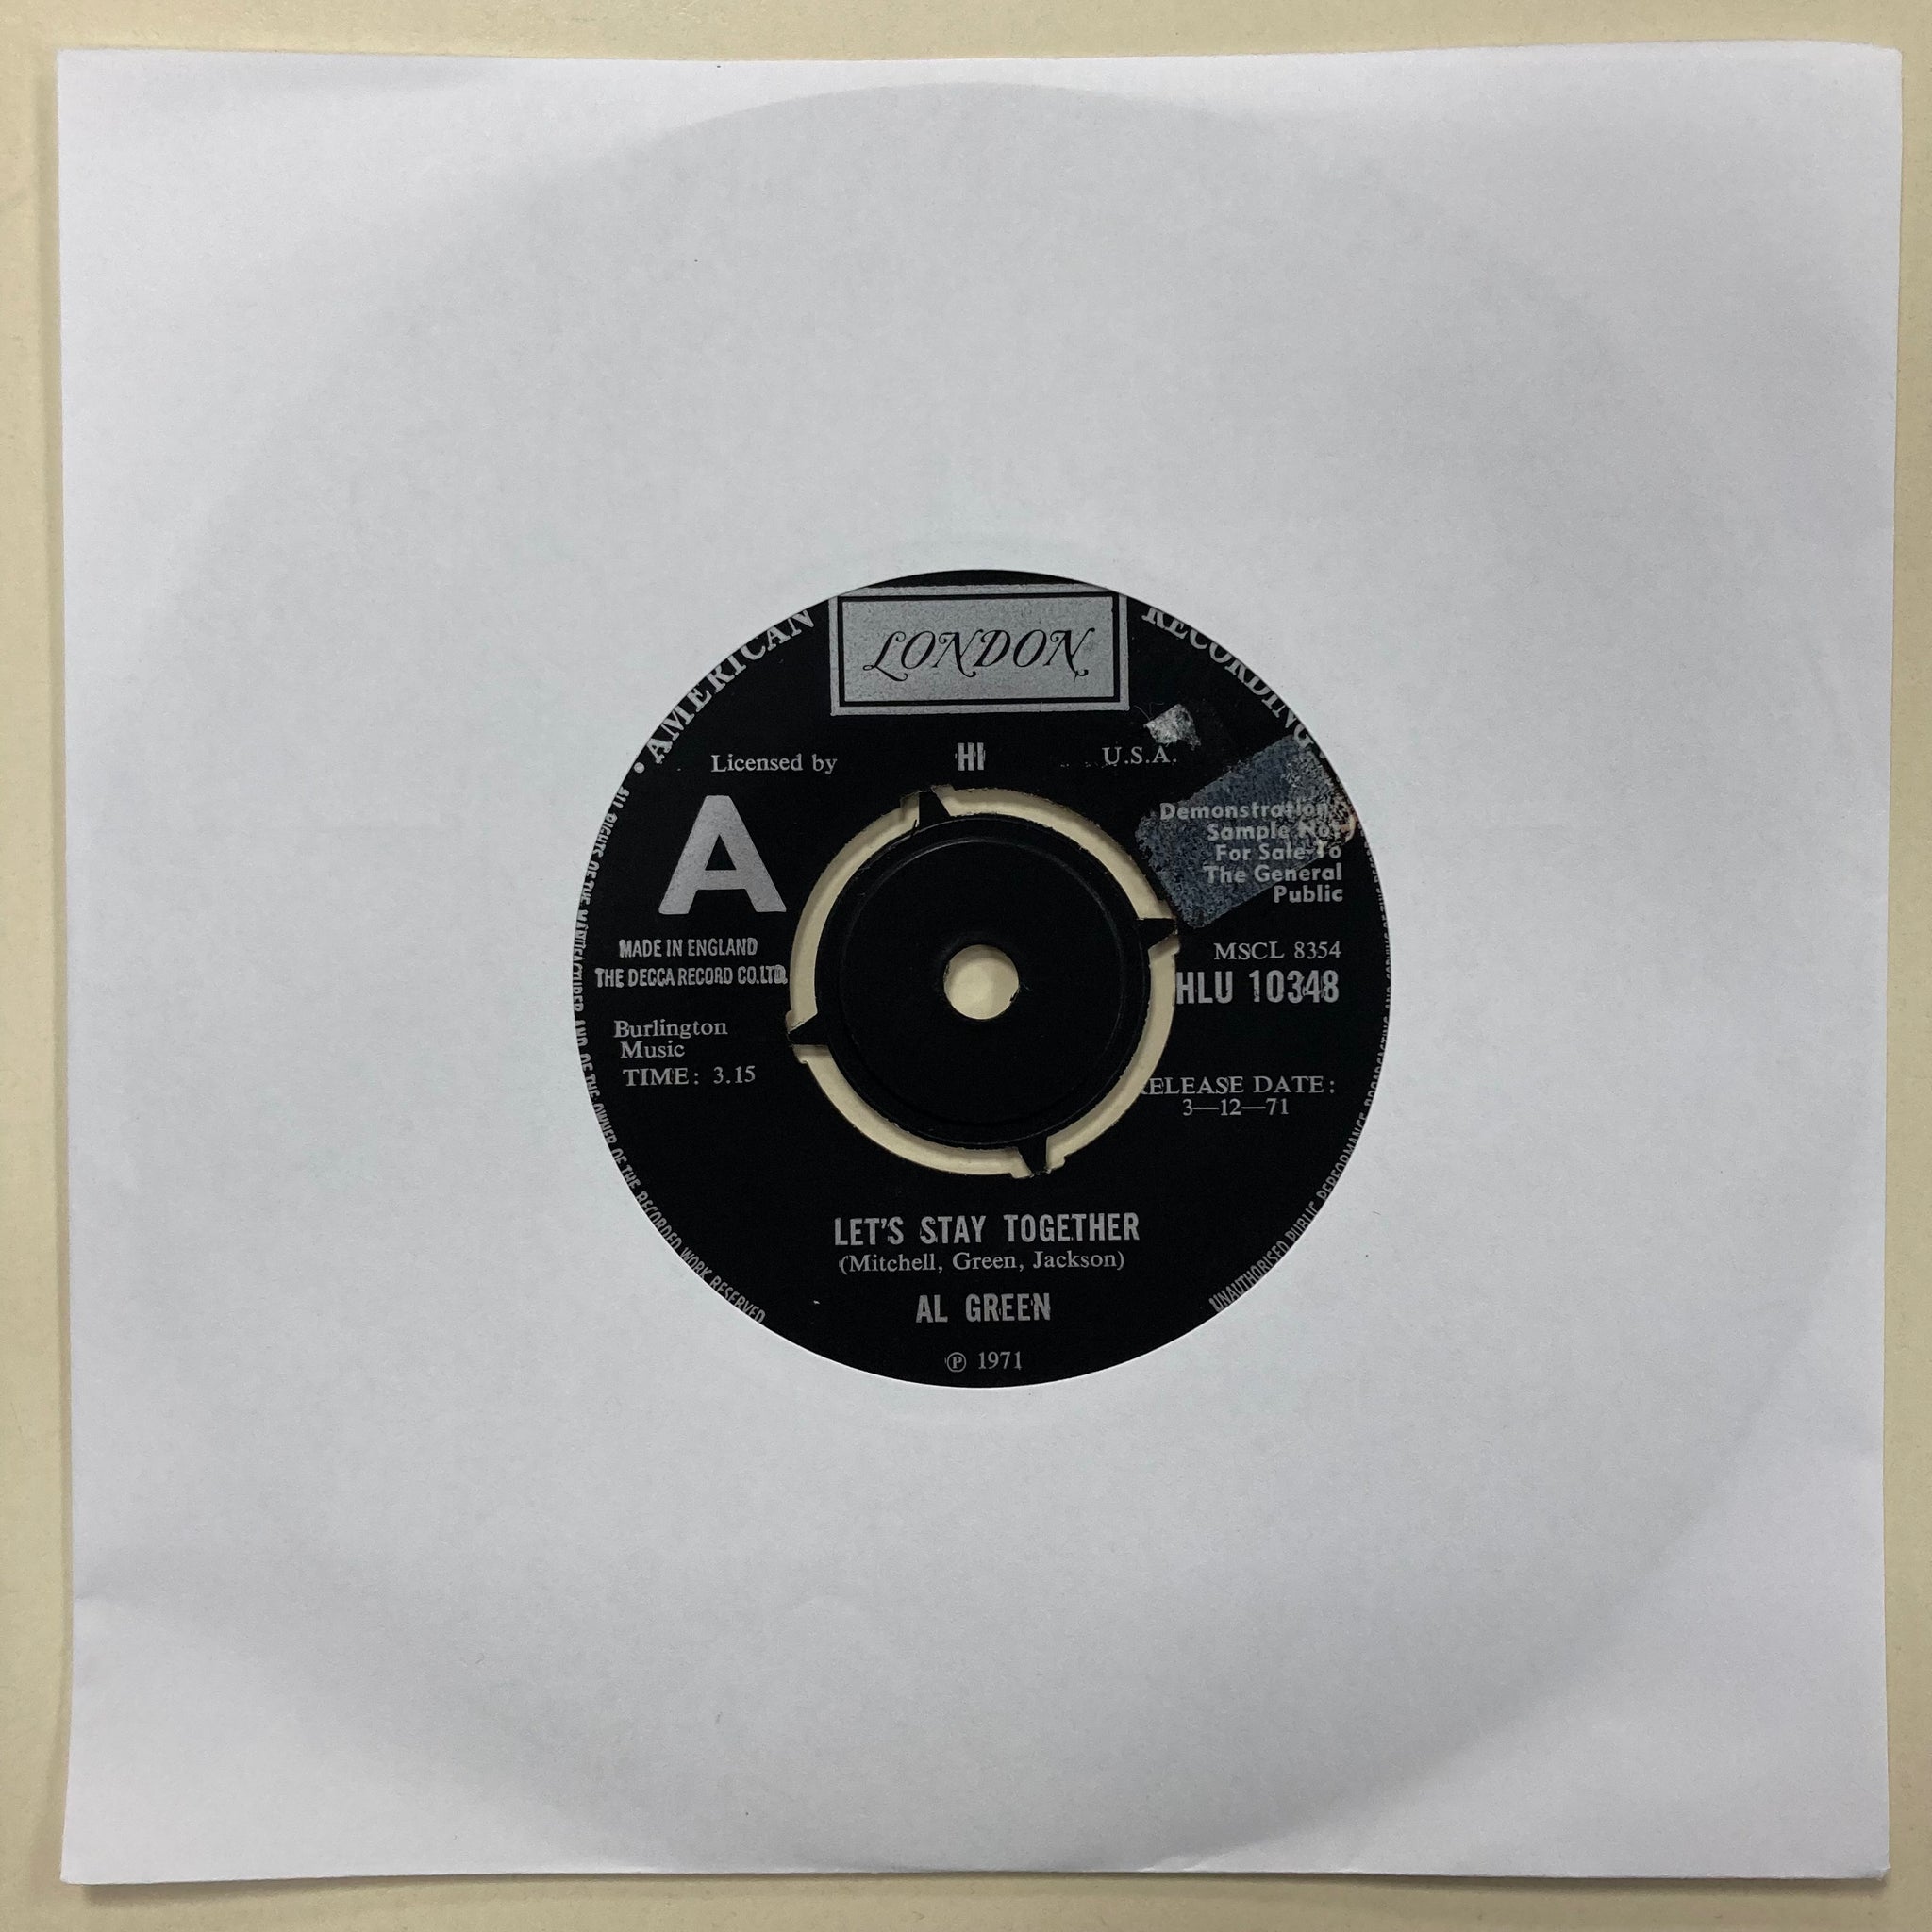 Al Green - Let's Stay Together - ORIGINAL PROMO ISSUE 7" SINGLE